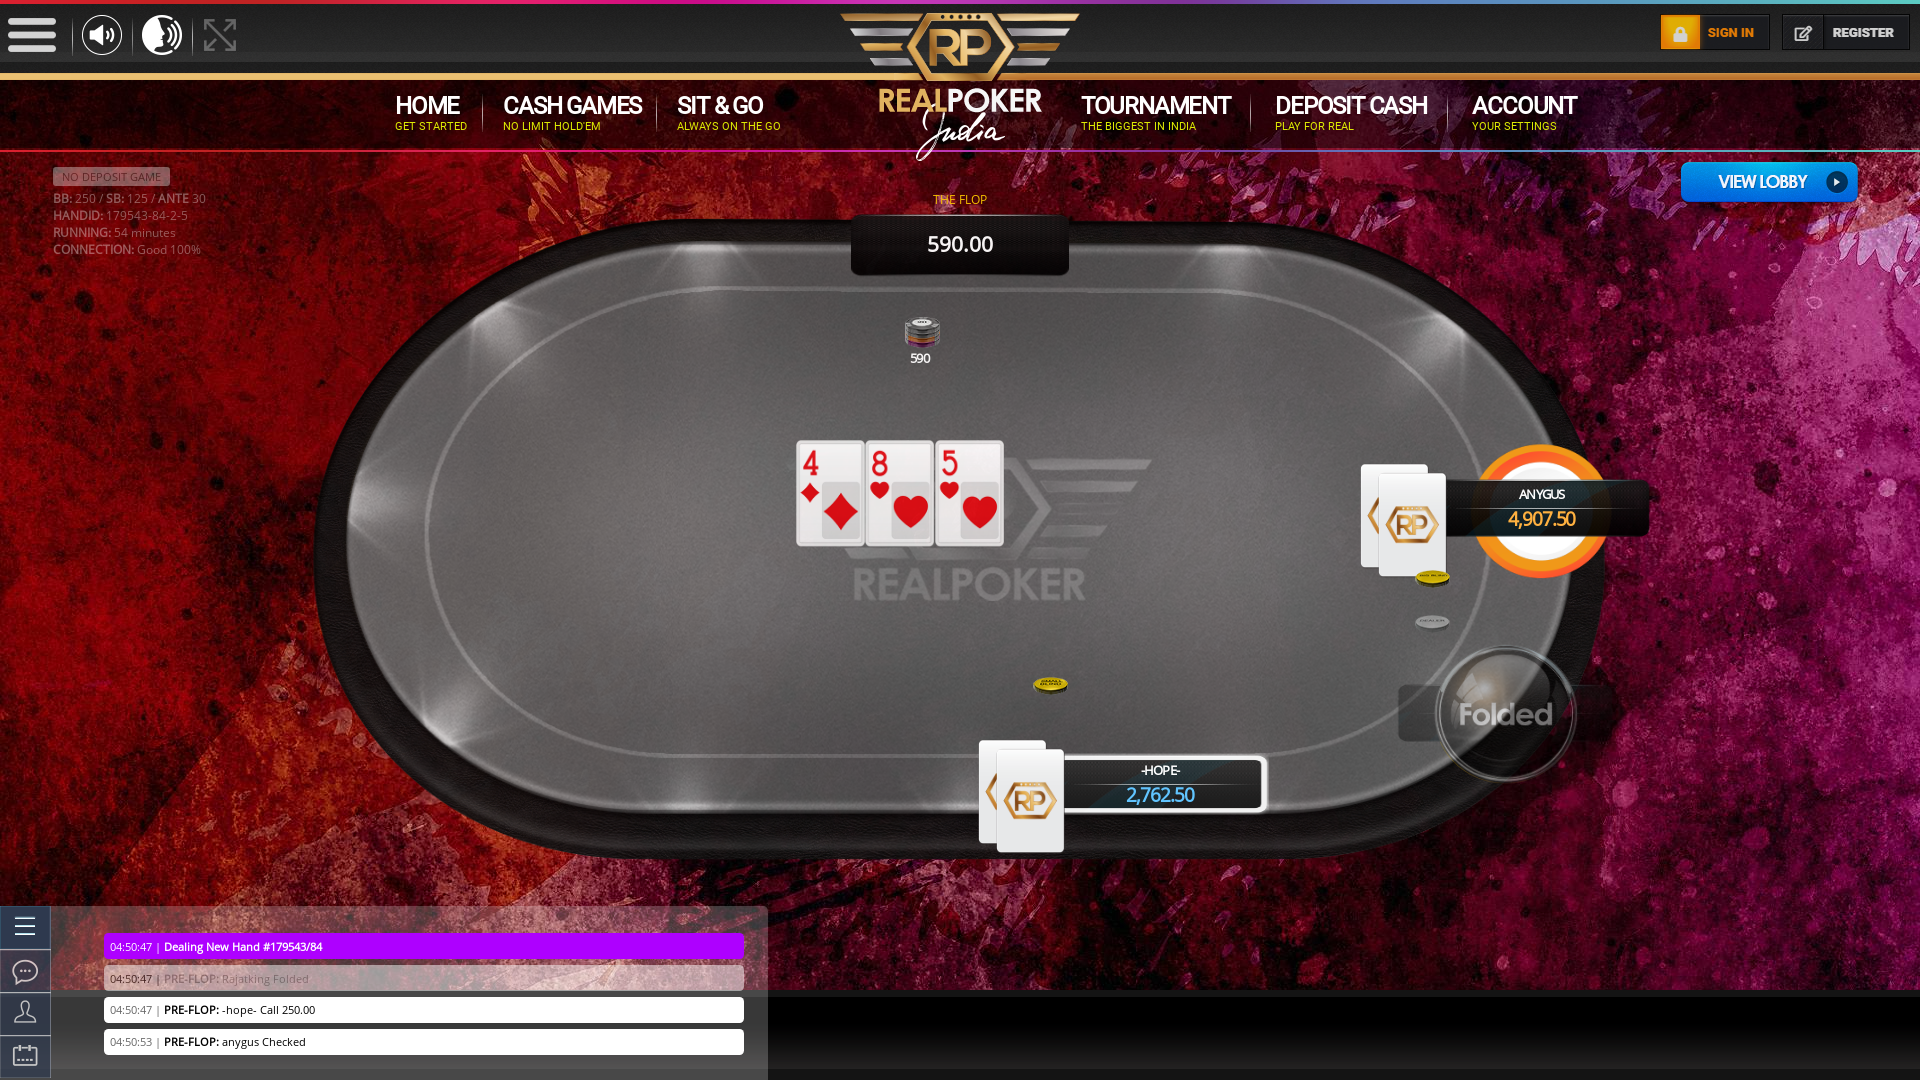 Indian online poker on a 10 player table in the 54th minute match up